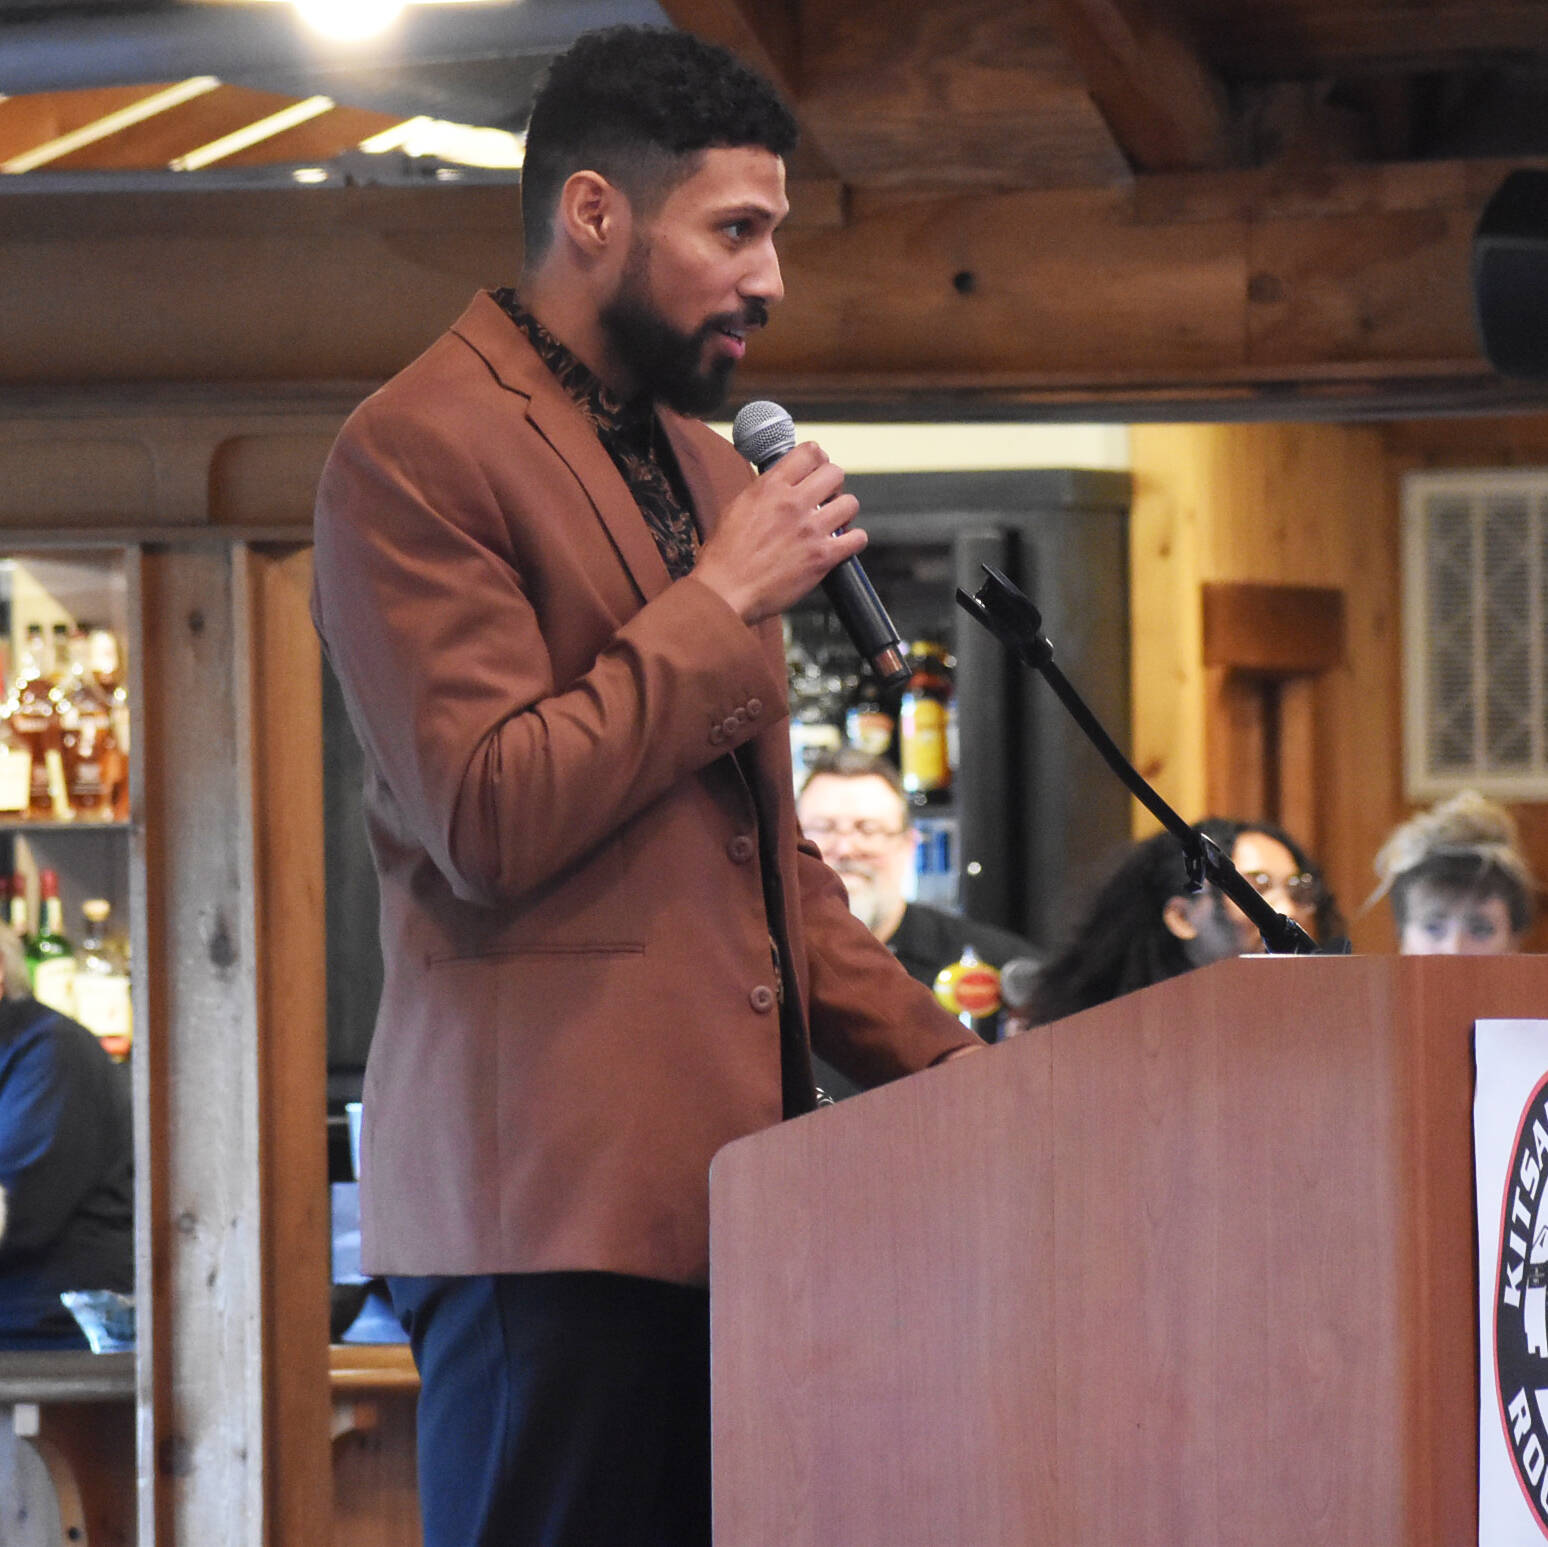 Former Spartan Steven Gray is inducted into the Kitsap Sports Hall of Fame. Nicholas zeller-Singh/Kitsap News Group